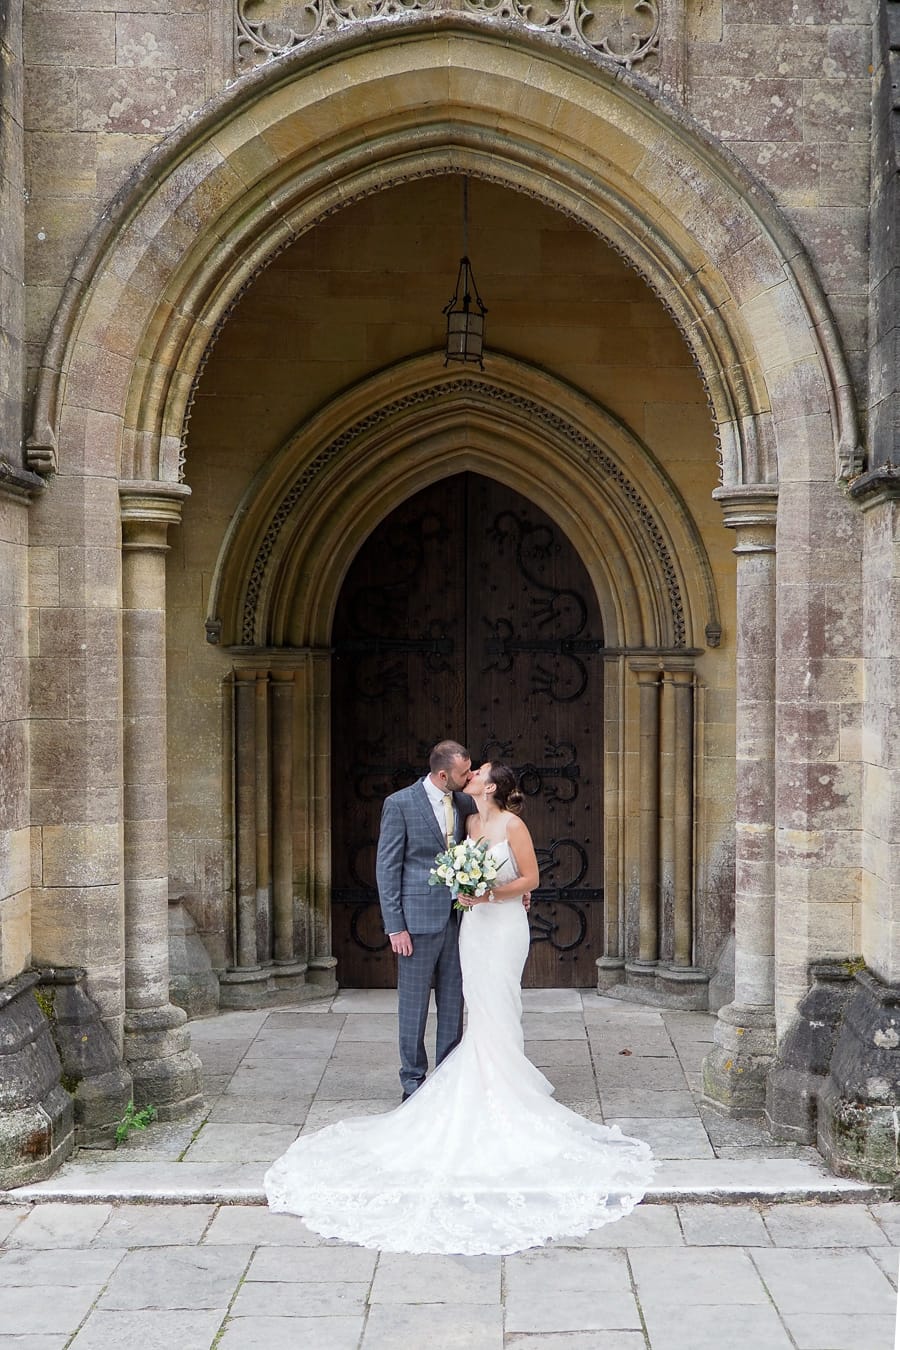 Romantic Romsey, olde worlde charm for a Hampshire wedding, with Dom Brenton Photography (14)